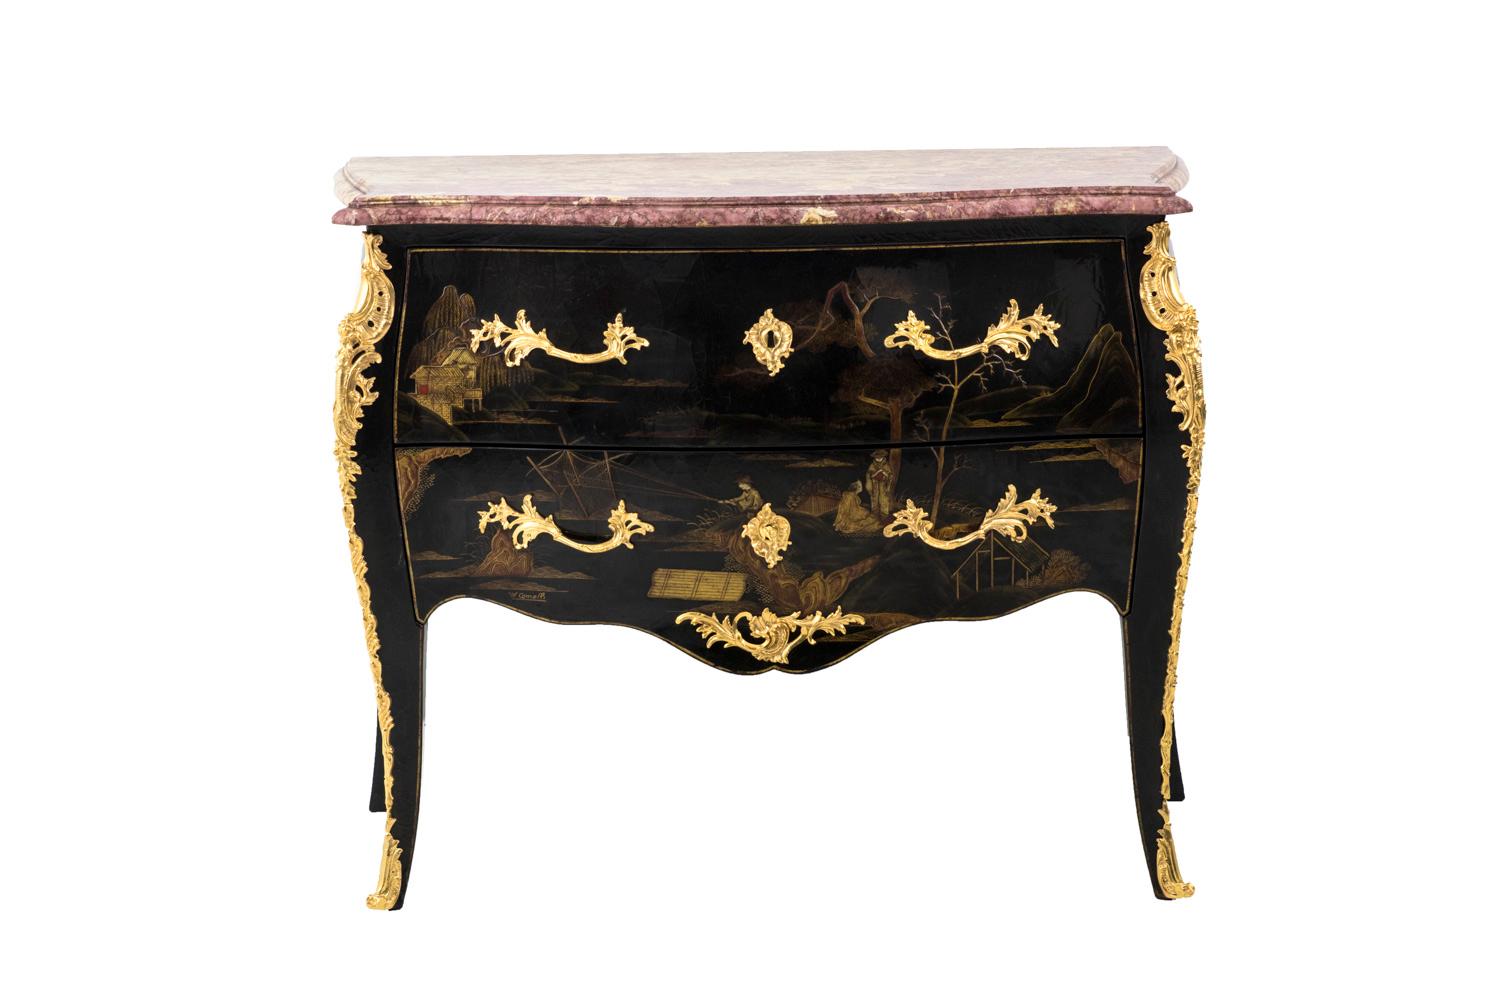 Walter Comelli, signed.
Louis XV style commode opening by two front drawers on two levels without crossbar and standing on four cabriole legs. Bulged shape and scalloped inferior drawer.
Black lacquer decor adorned with gilt lake landscapes with